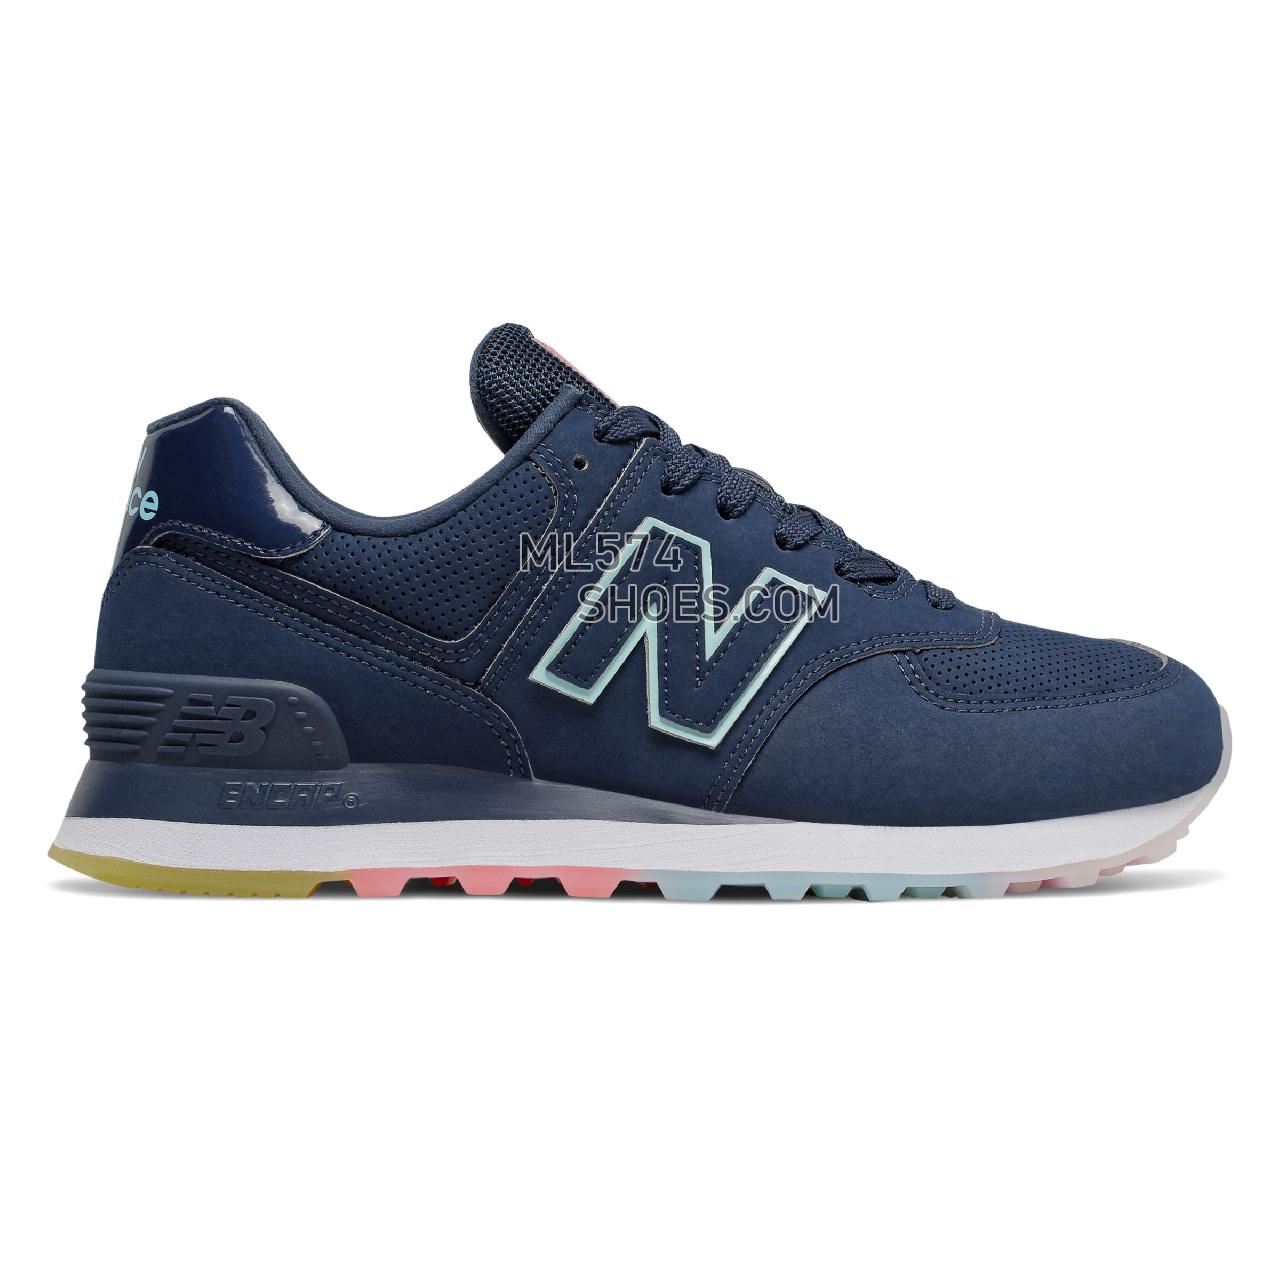 New Balance 574 - Women's Classic Sneakers - Natural Indigo with Bali Blue - WL574SON